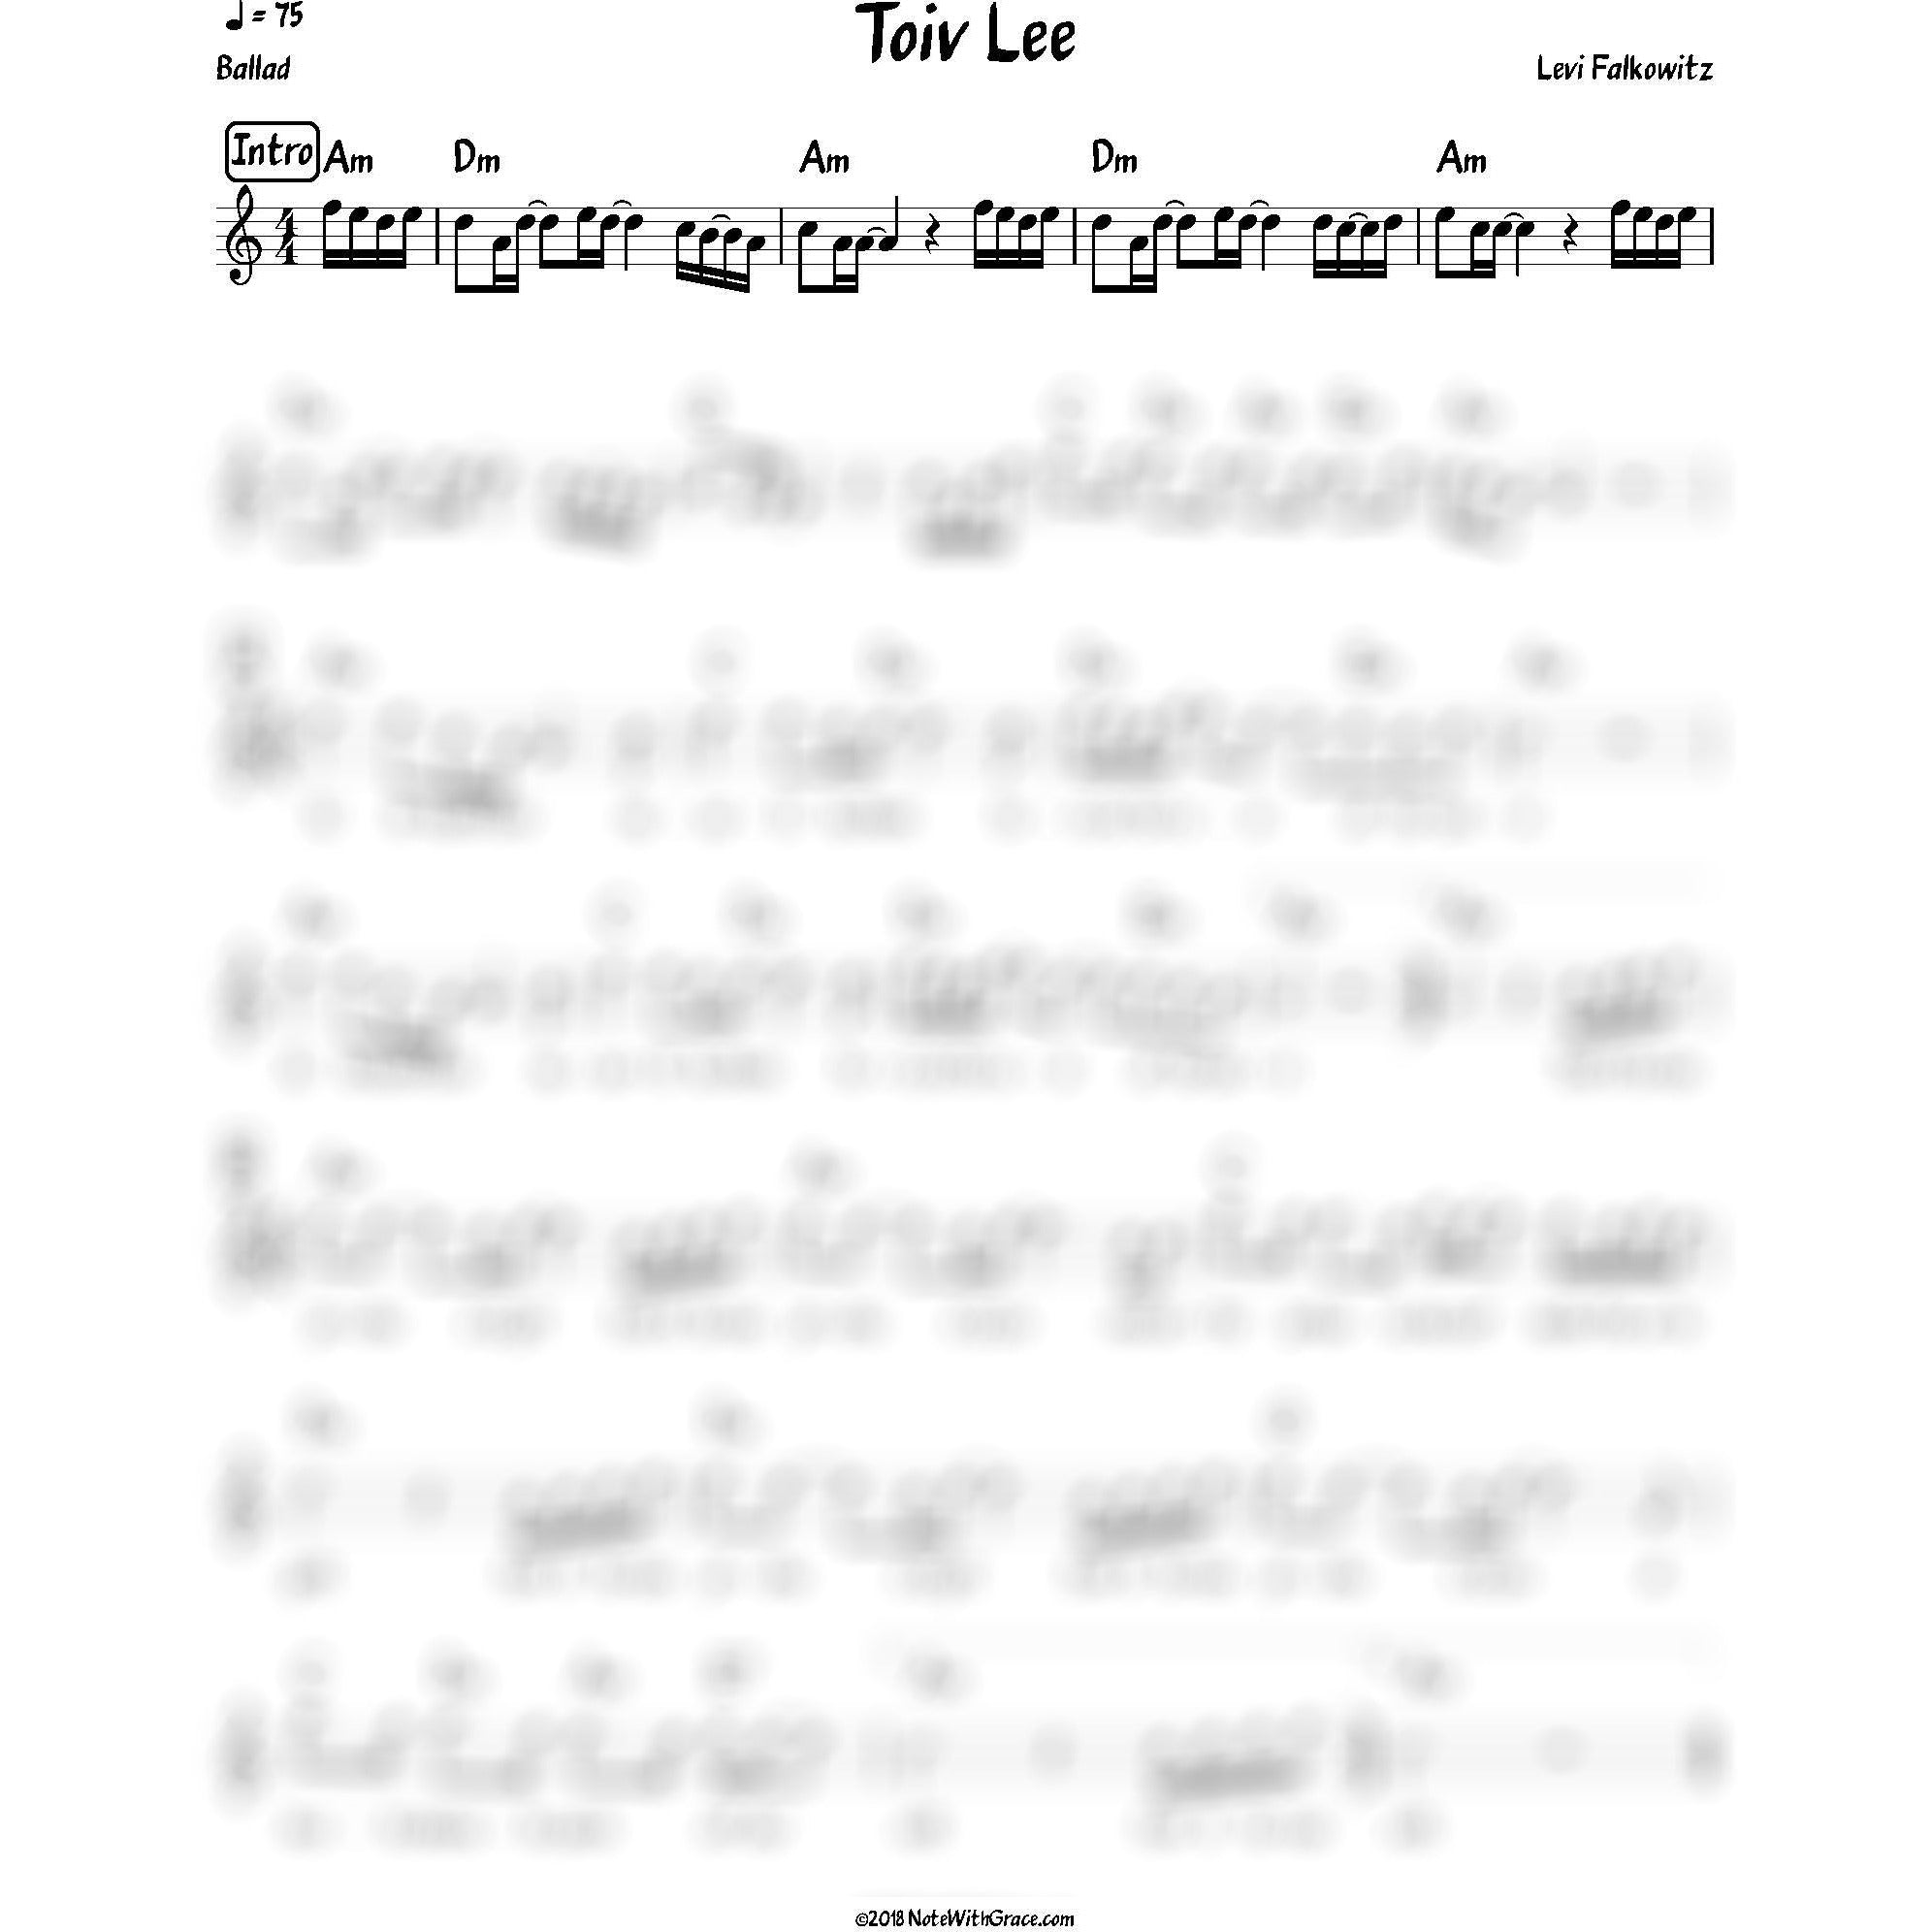 Toiv Lee Lead Sheet (Levy Falkowitz) Album: Toiv Lee-Sheet music-NoteWithGrace.com